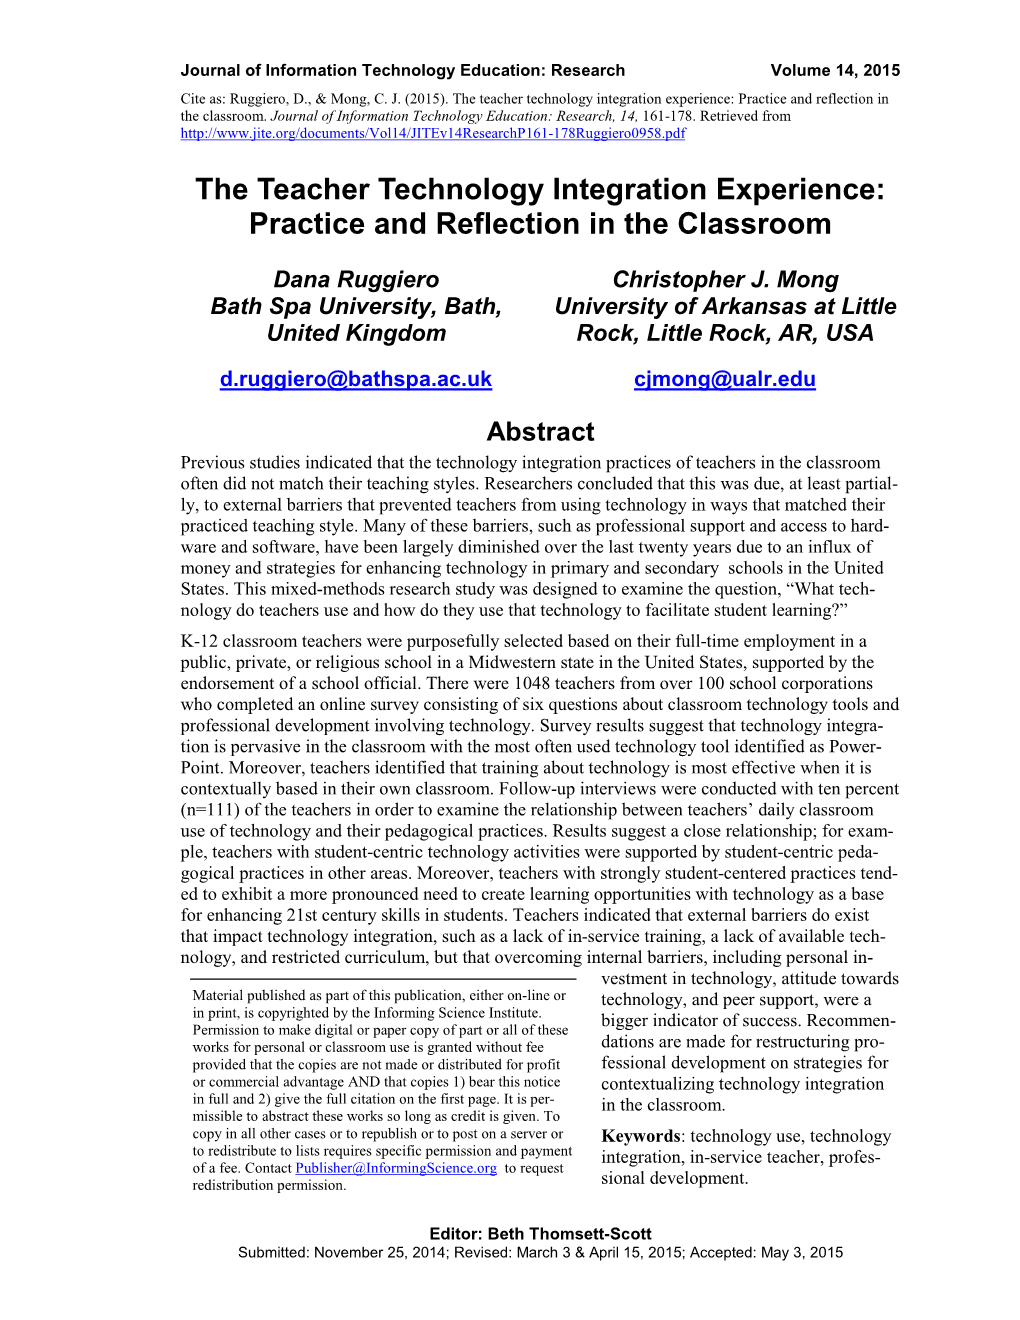 The Teacher Technology Integration Experience: Practice and Reflection in the Classroom